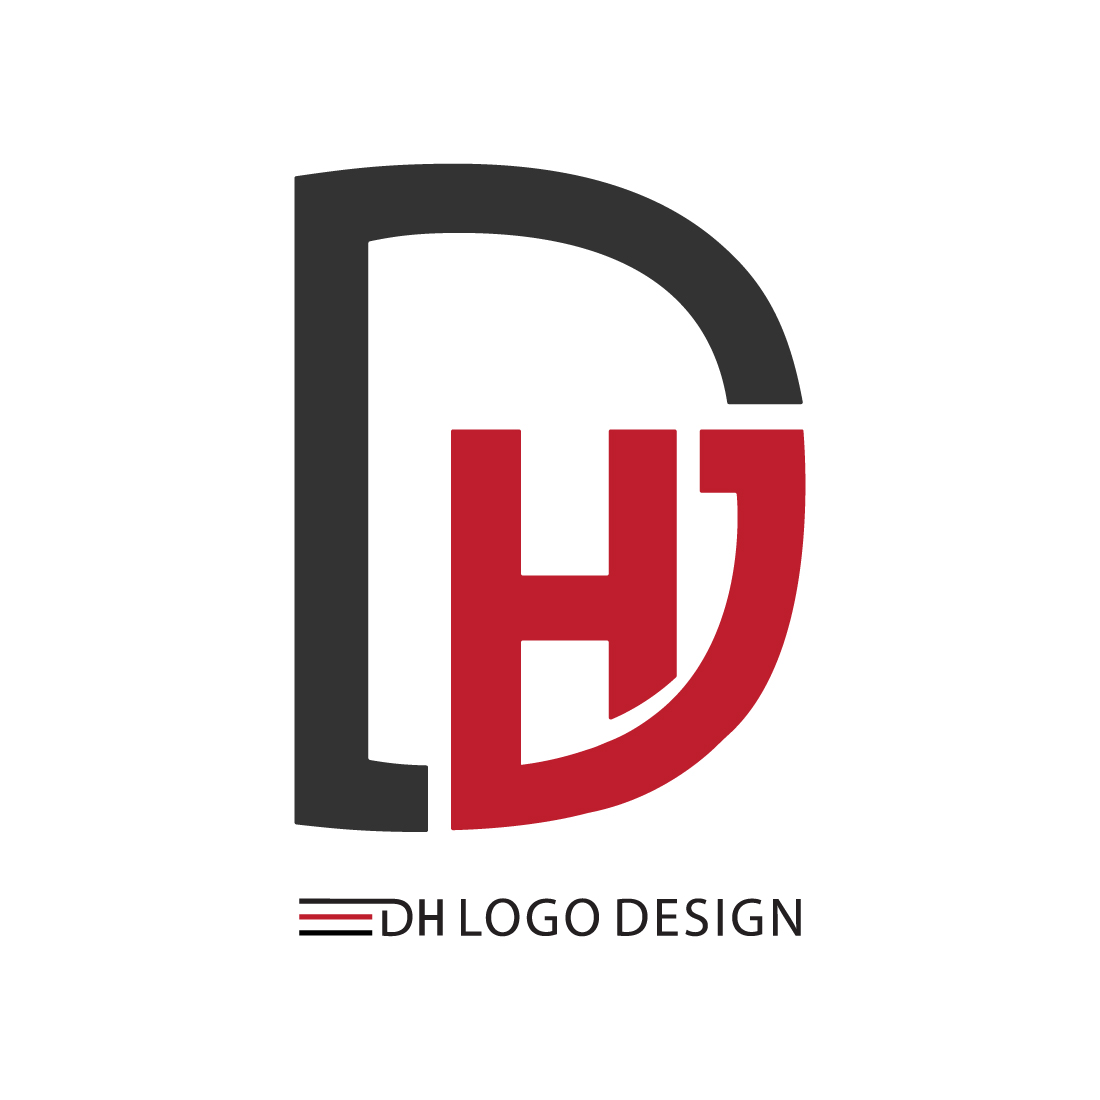 Initials DH letters logo design DH logo vector template image design HR logo red and black color icon design HD logo logo monogram best company identity preview image.